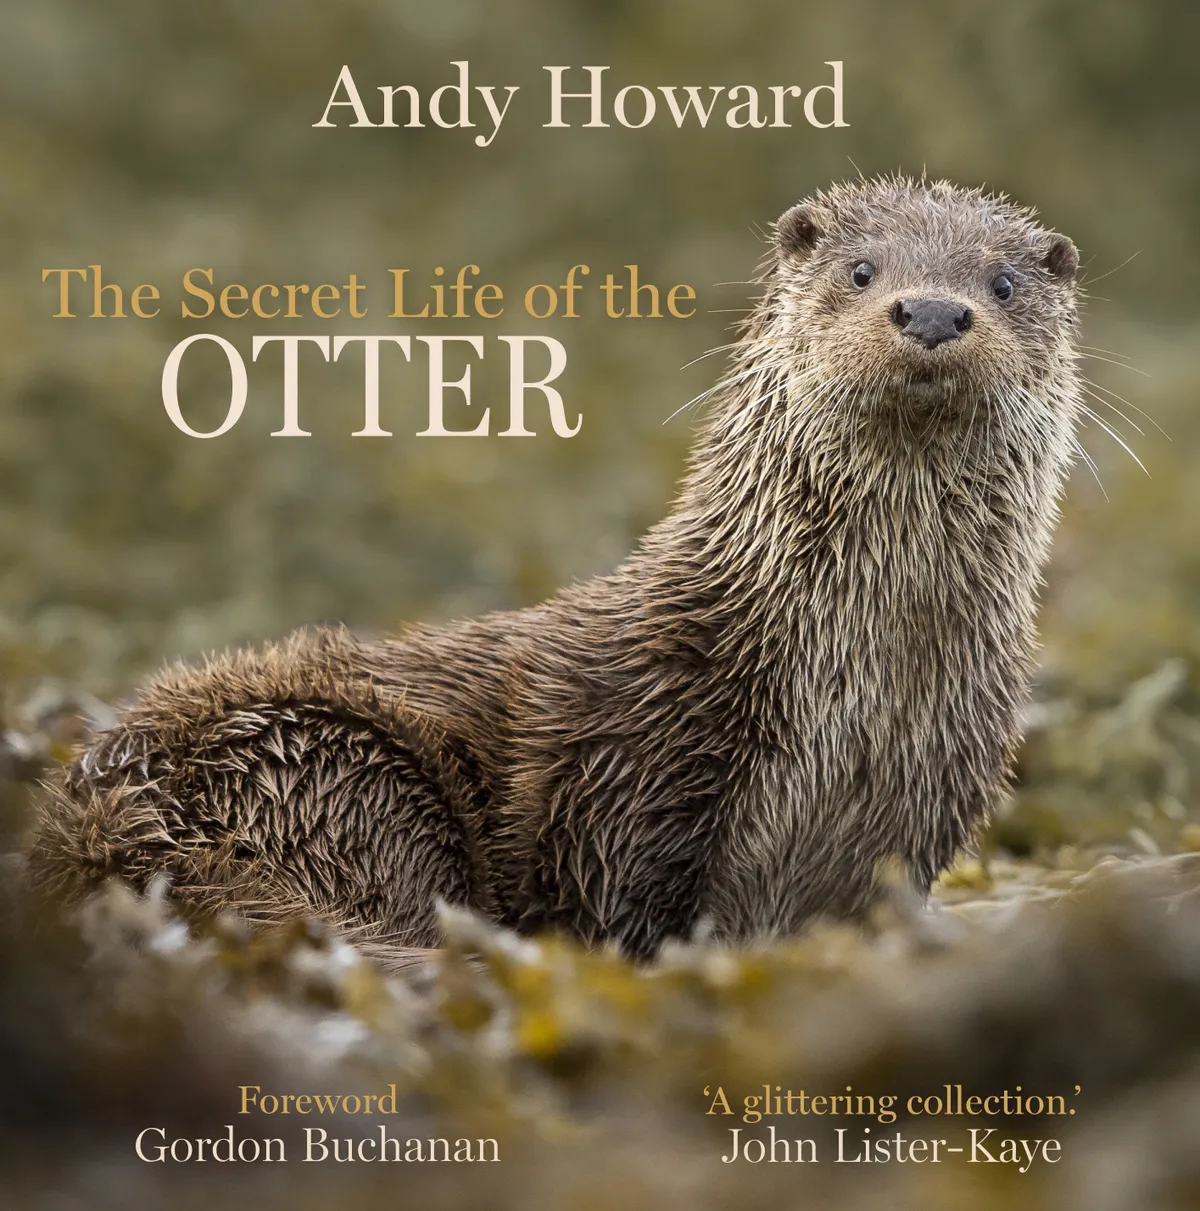 Secret Life of the Otter, by Andy Howard. Published by Sandstone Press.